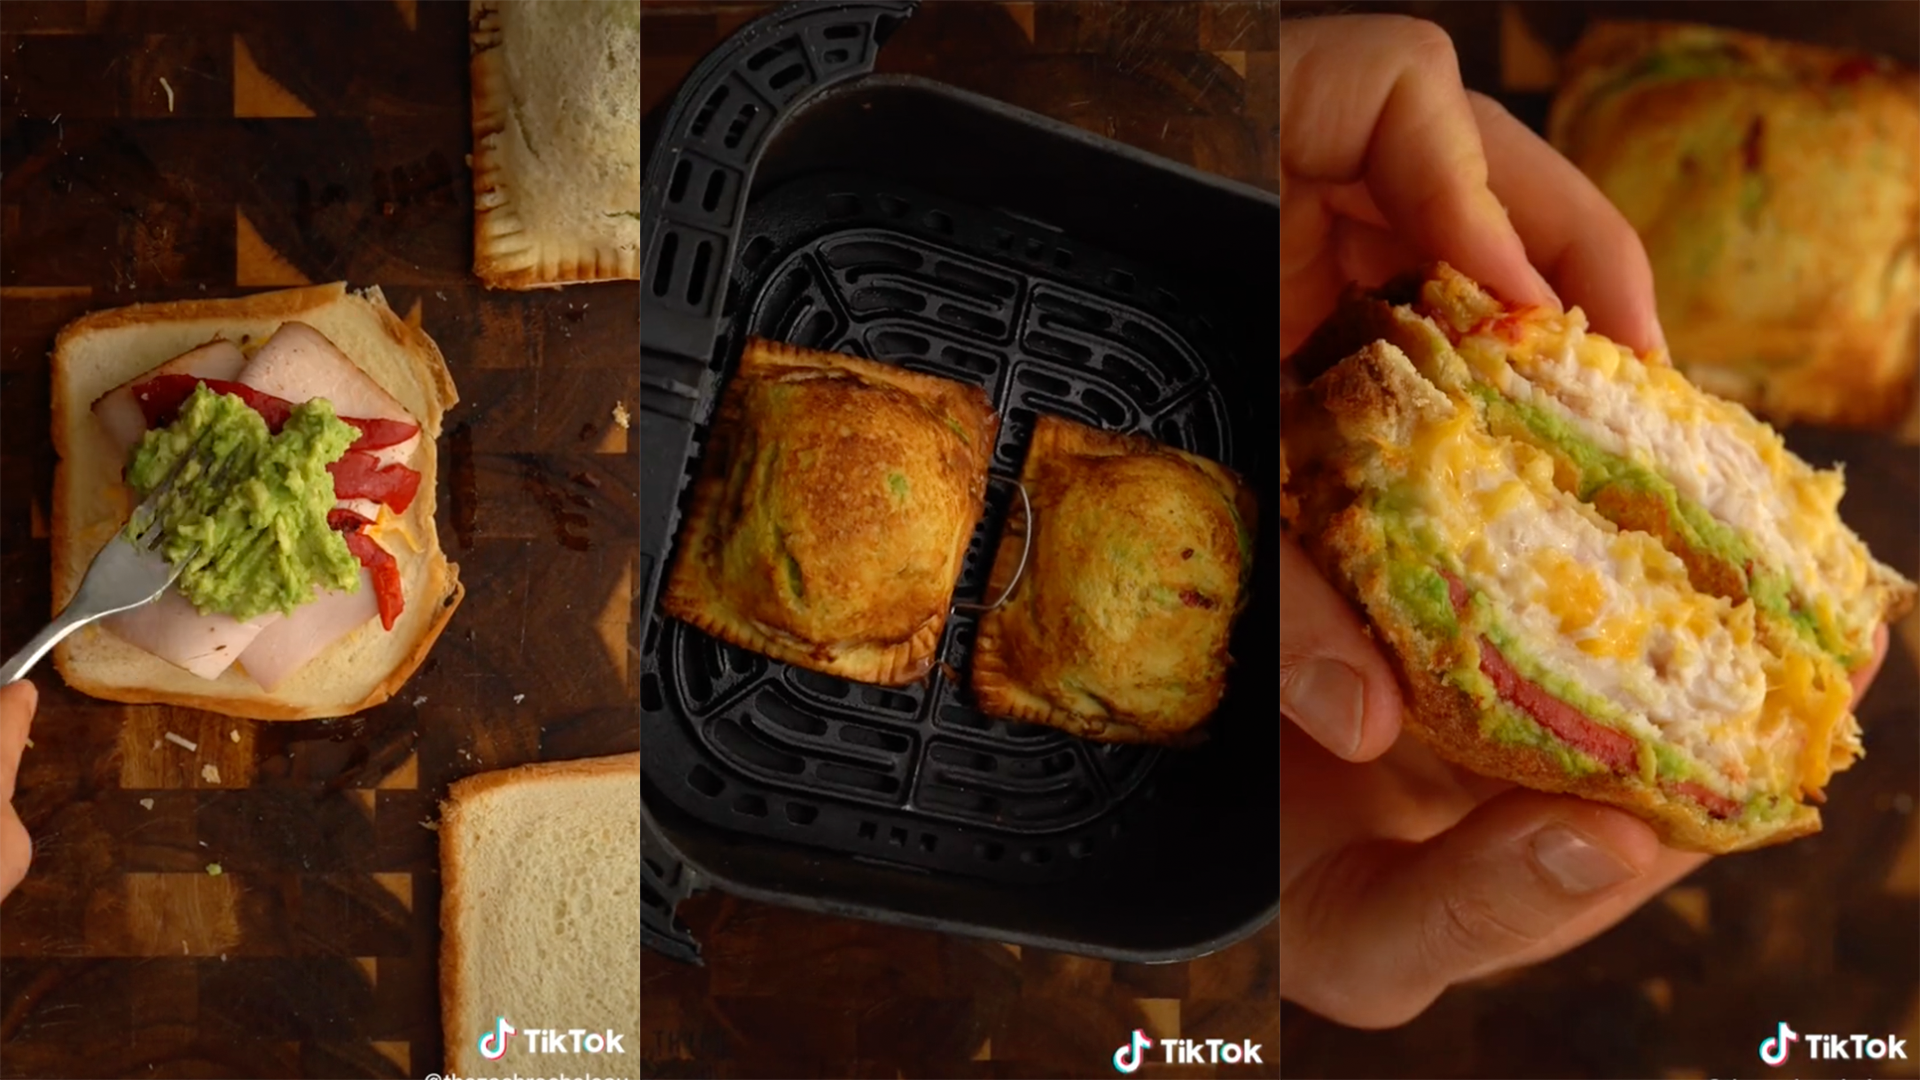 homemade hot pocket in different stages of being cooked